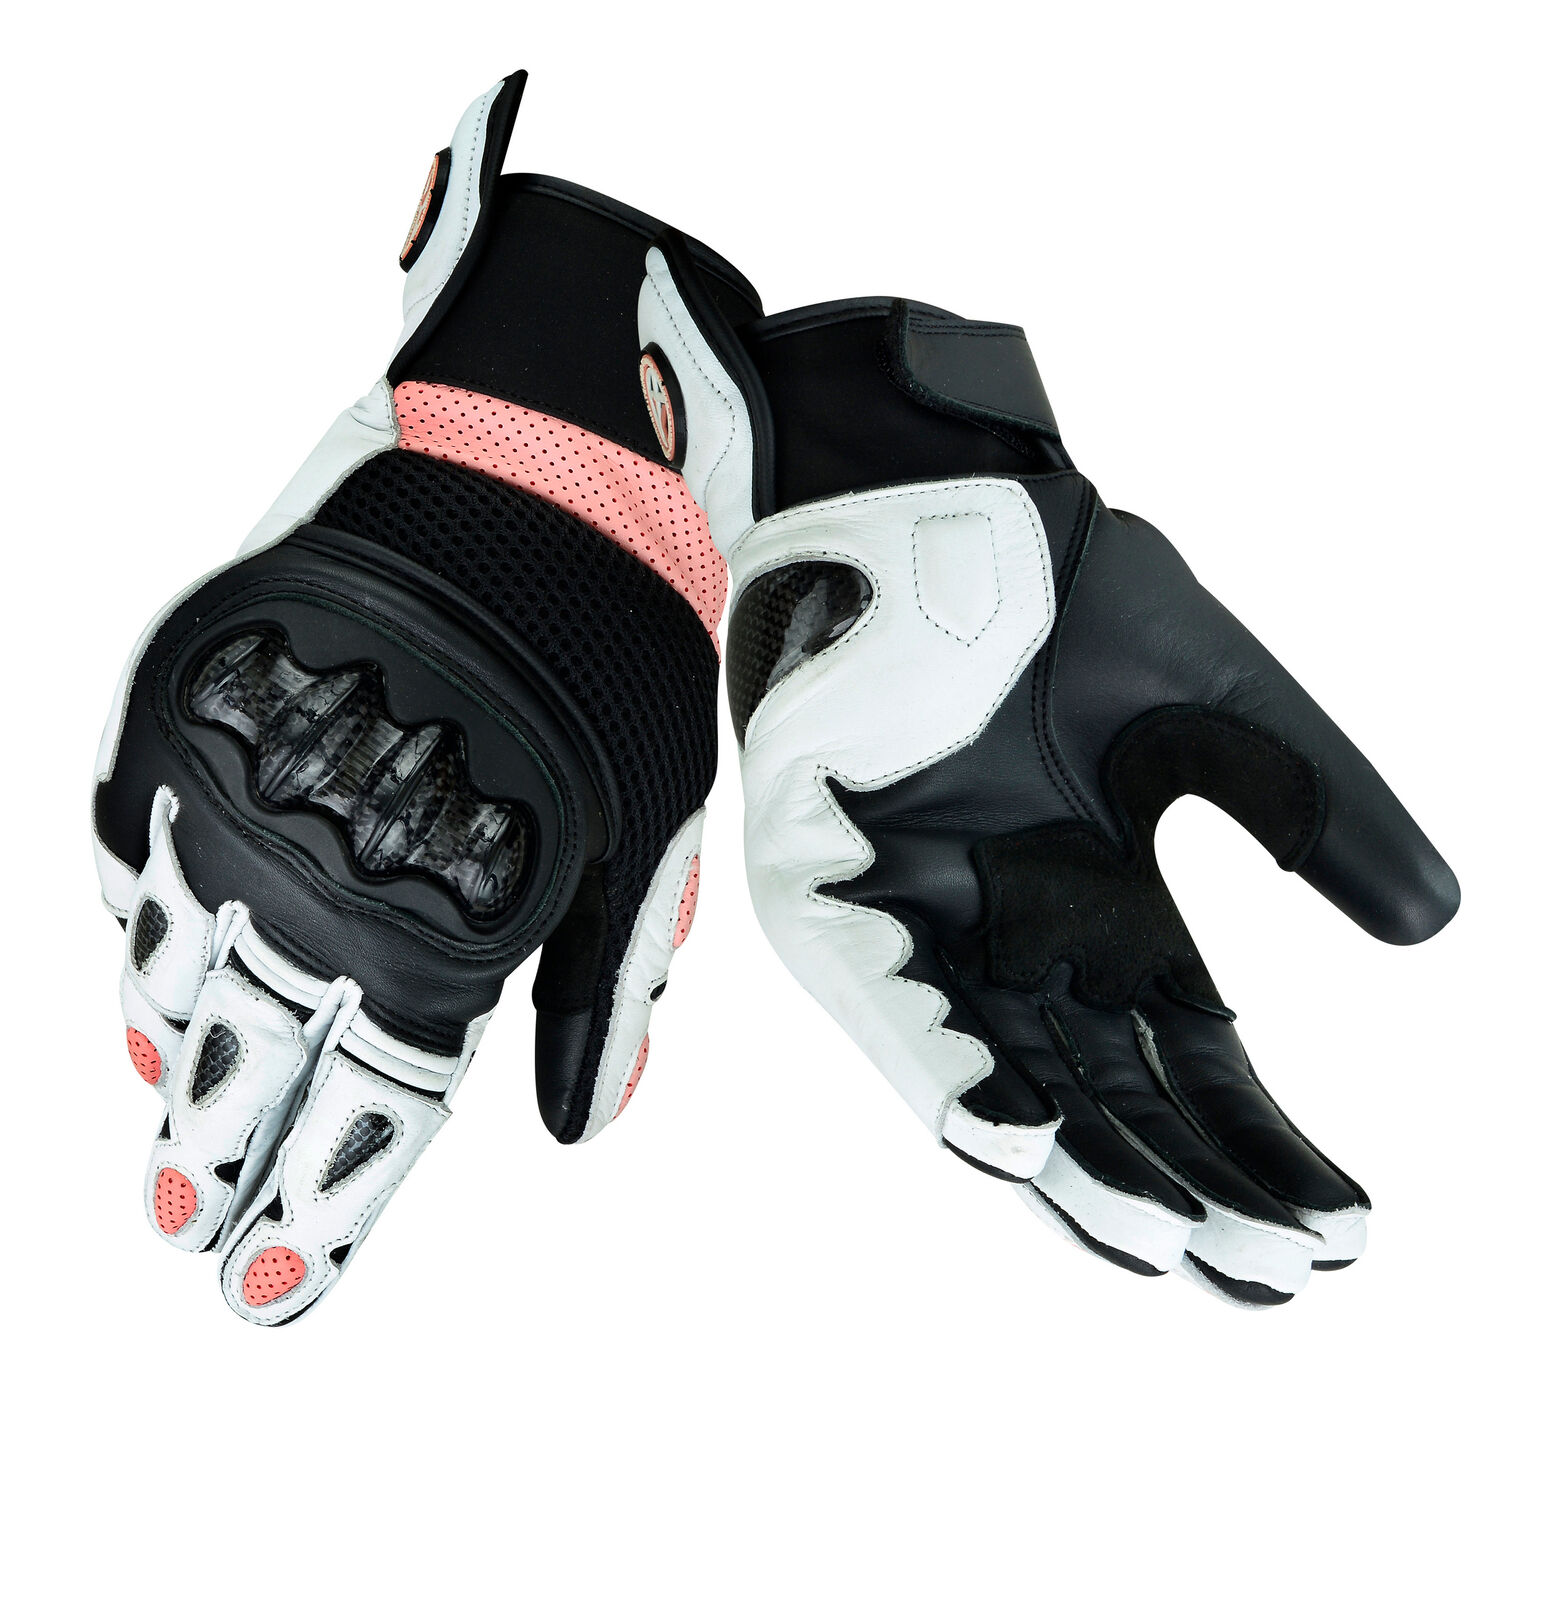 Hot sale women durable ventilating leather full finger outdoor motorcycle gloves